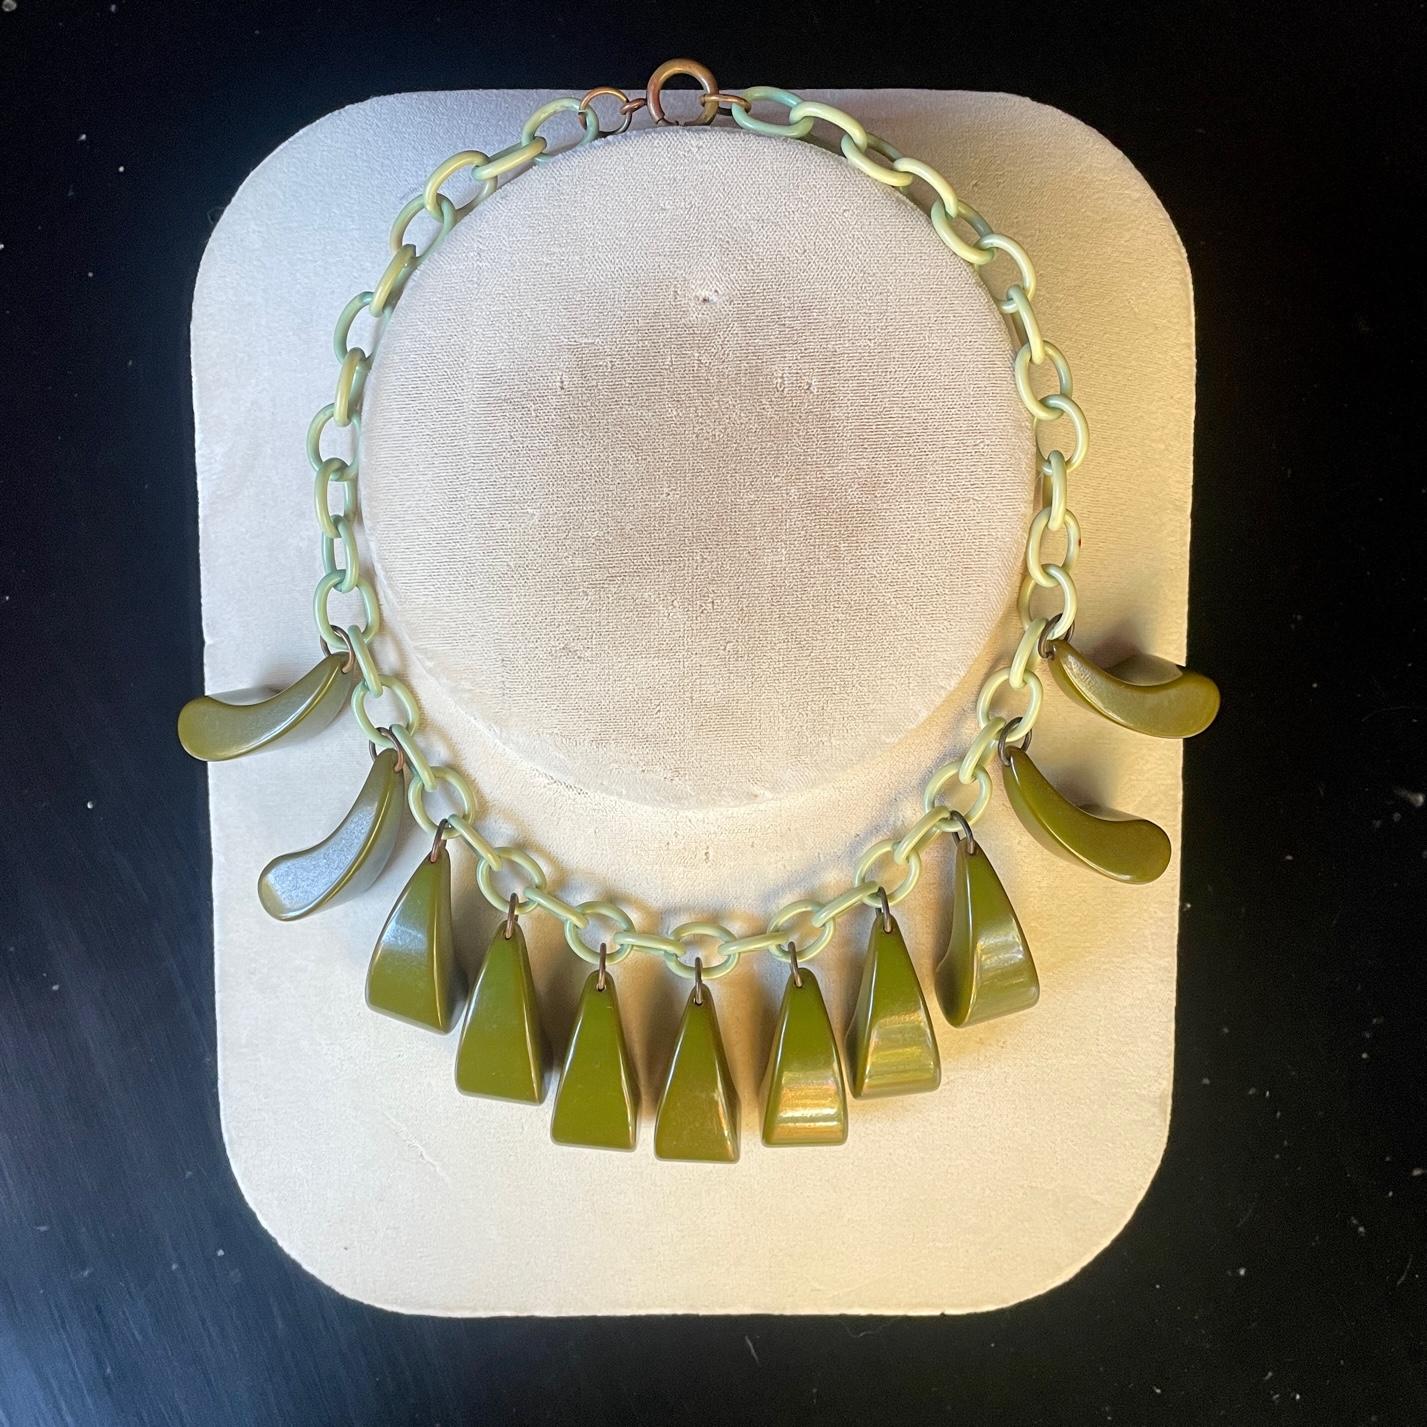 USA c.1930s. Unknown Maker, possibly Mazor.   A light green Celluloid linked chain and (11) dark green Bakelite dangles. They have an organic feeling of arching reeds or arcing grass blades. American Industrial design mimicking and abstracting